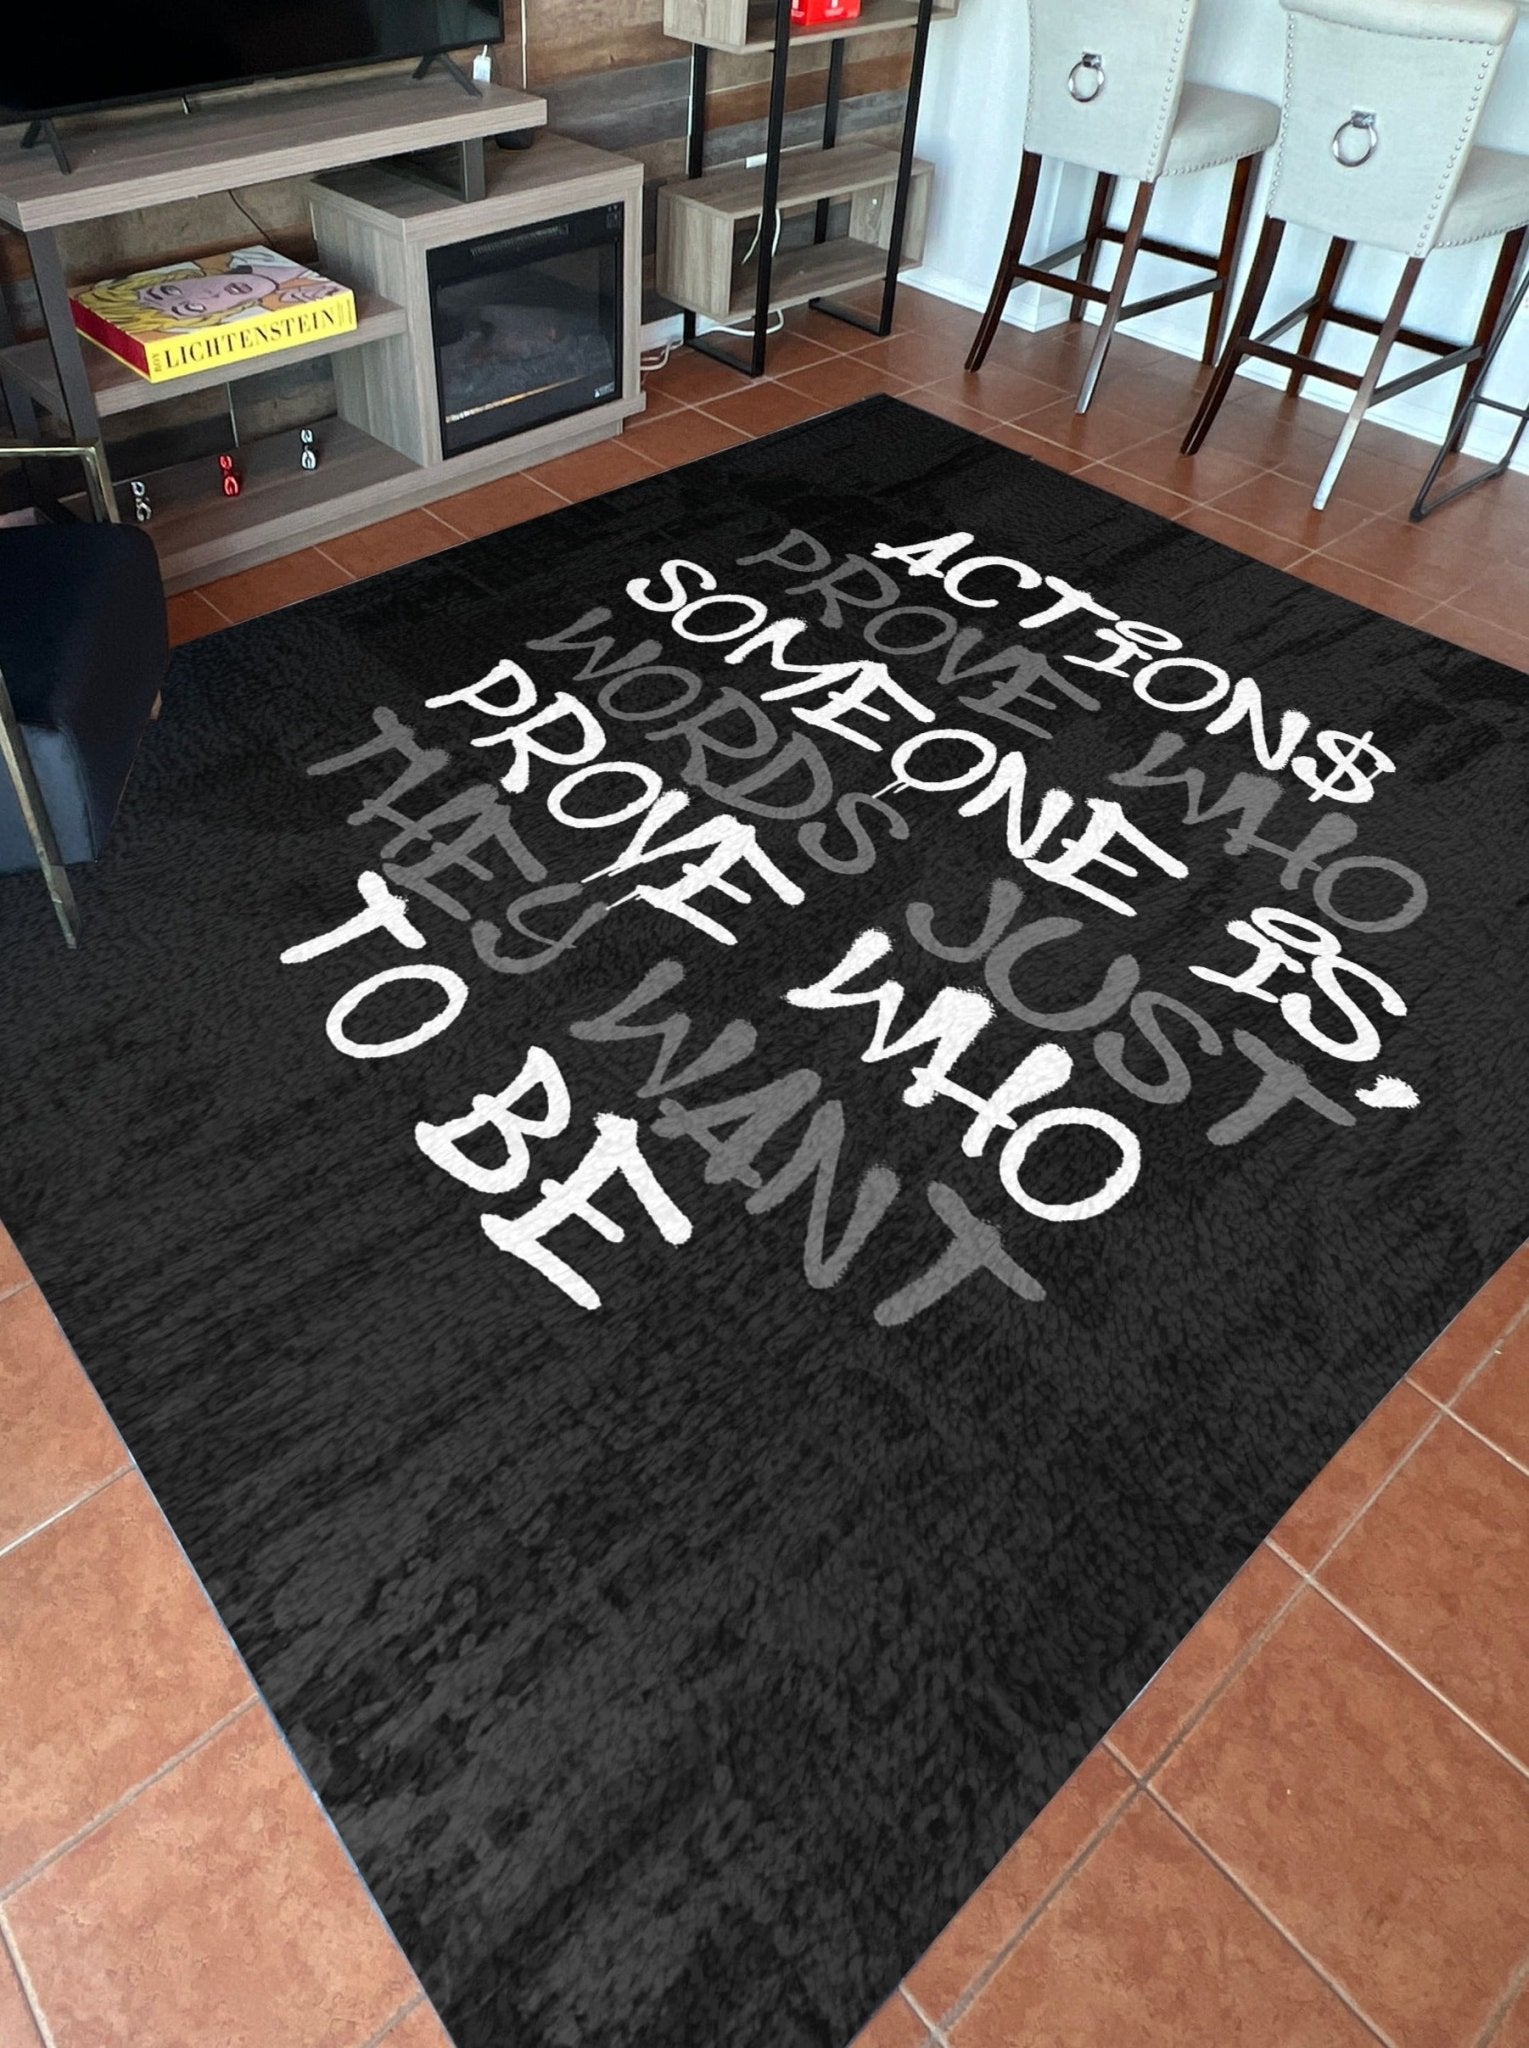 Actions Prove Who Someone Is Rug - REBHORN DESIGN